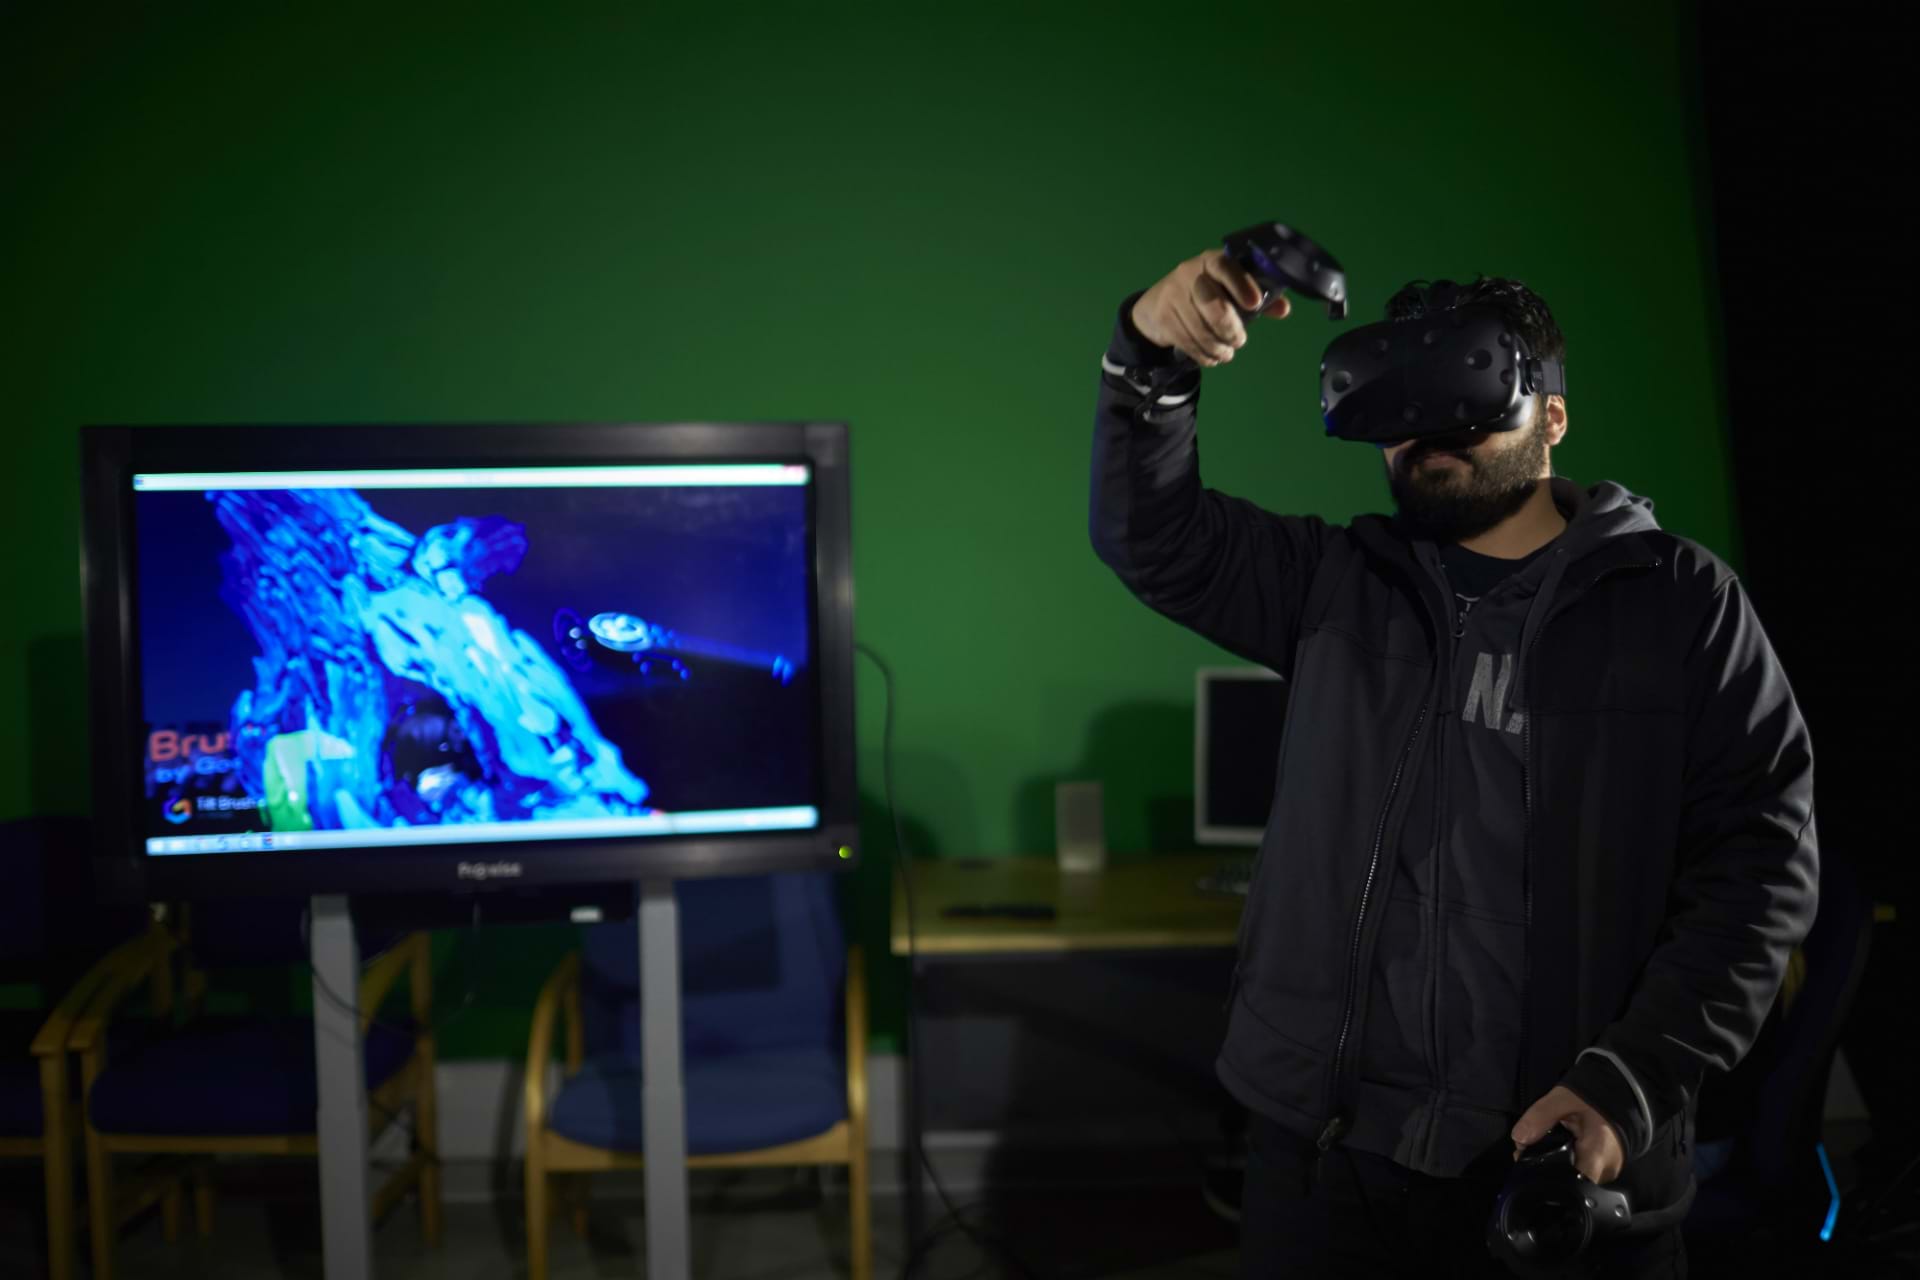 A student using VR in a green screen room with a screen in the background showing a video game